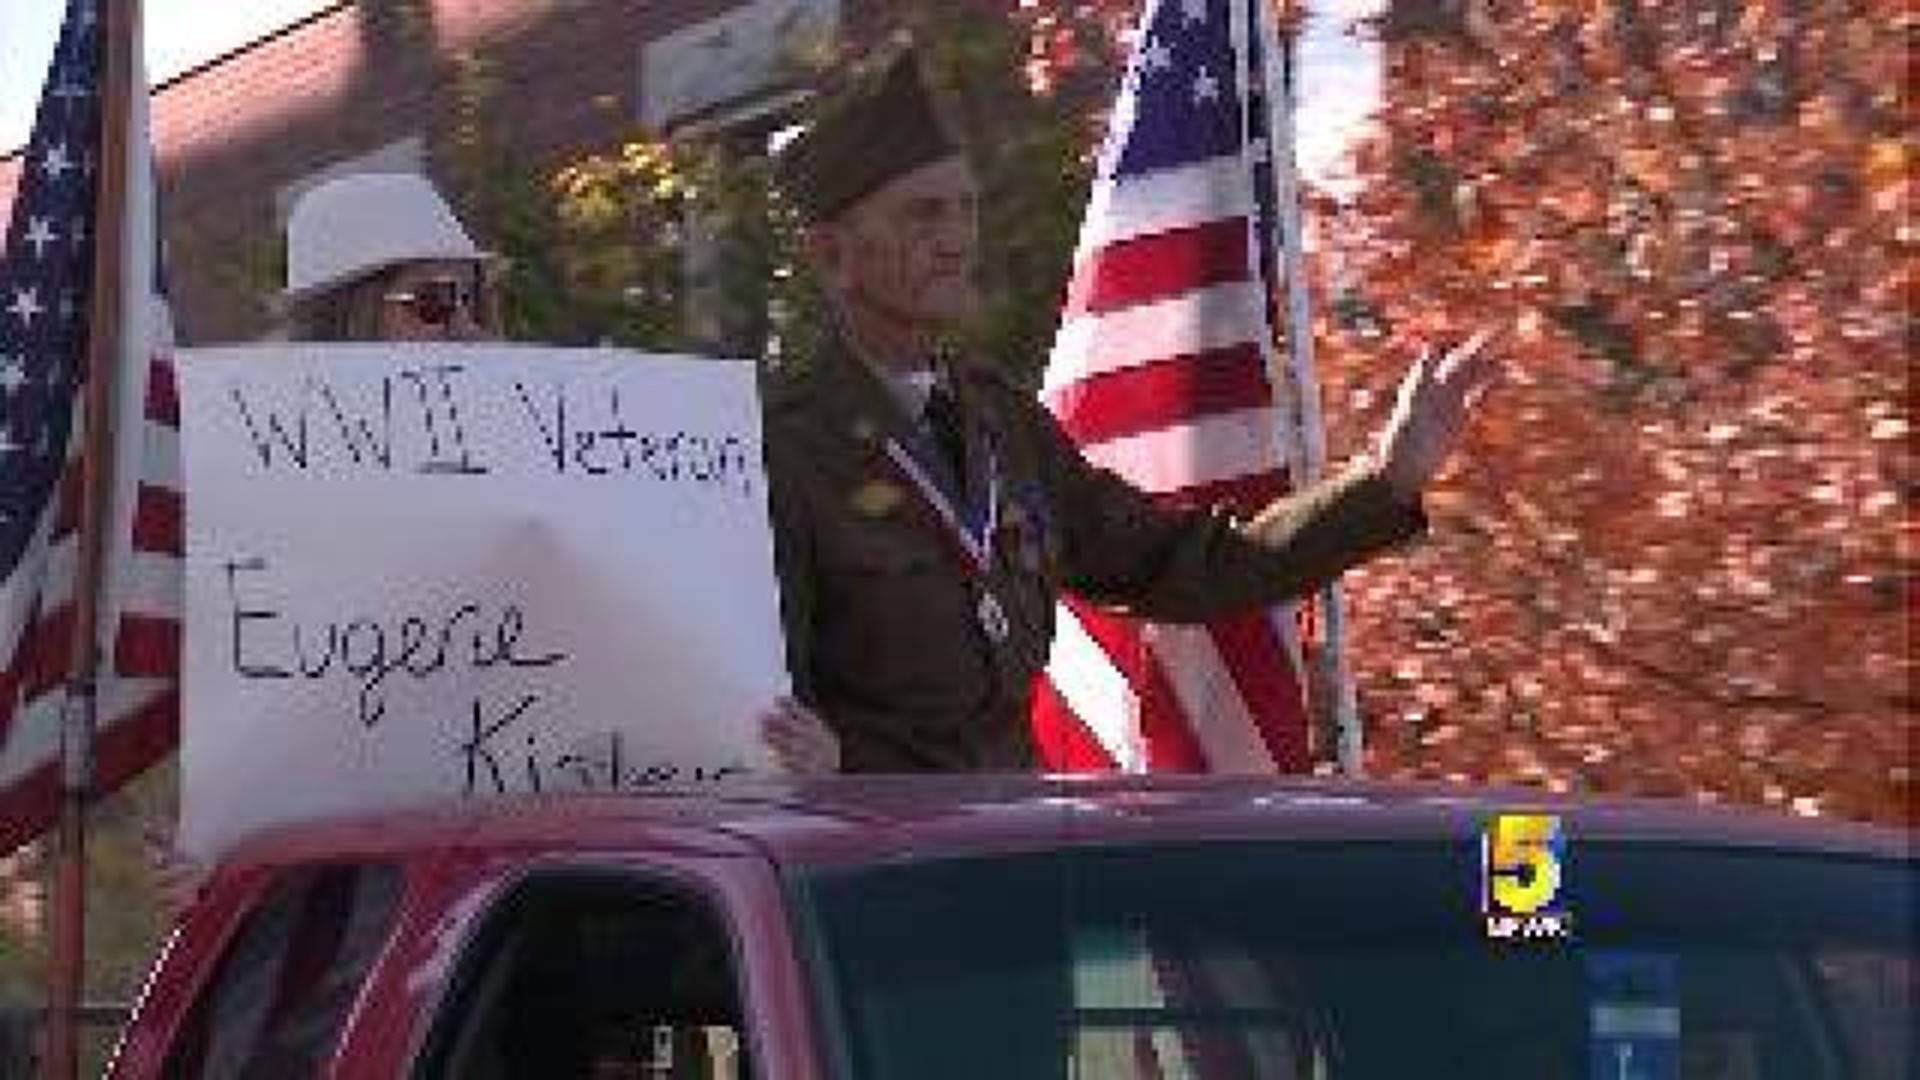 Vets Shared Their Stories at the NWA Veterans Parade